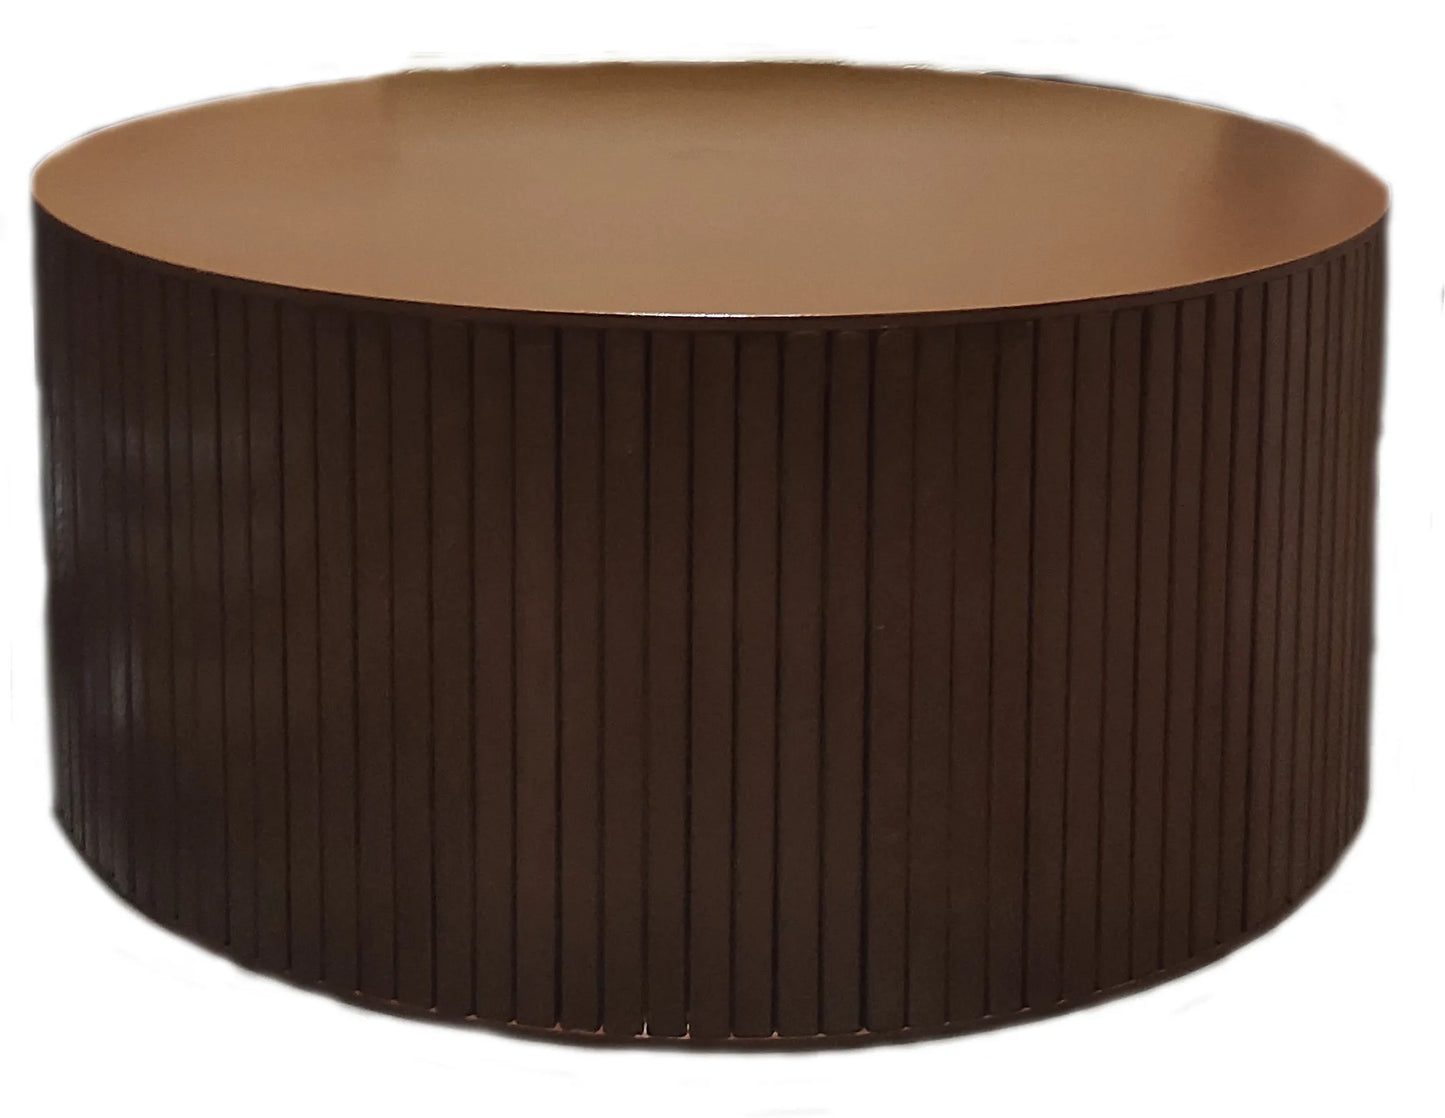 Nomad Round Coffee Table - Antique Light Brown